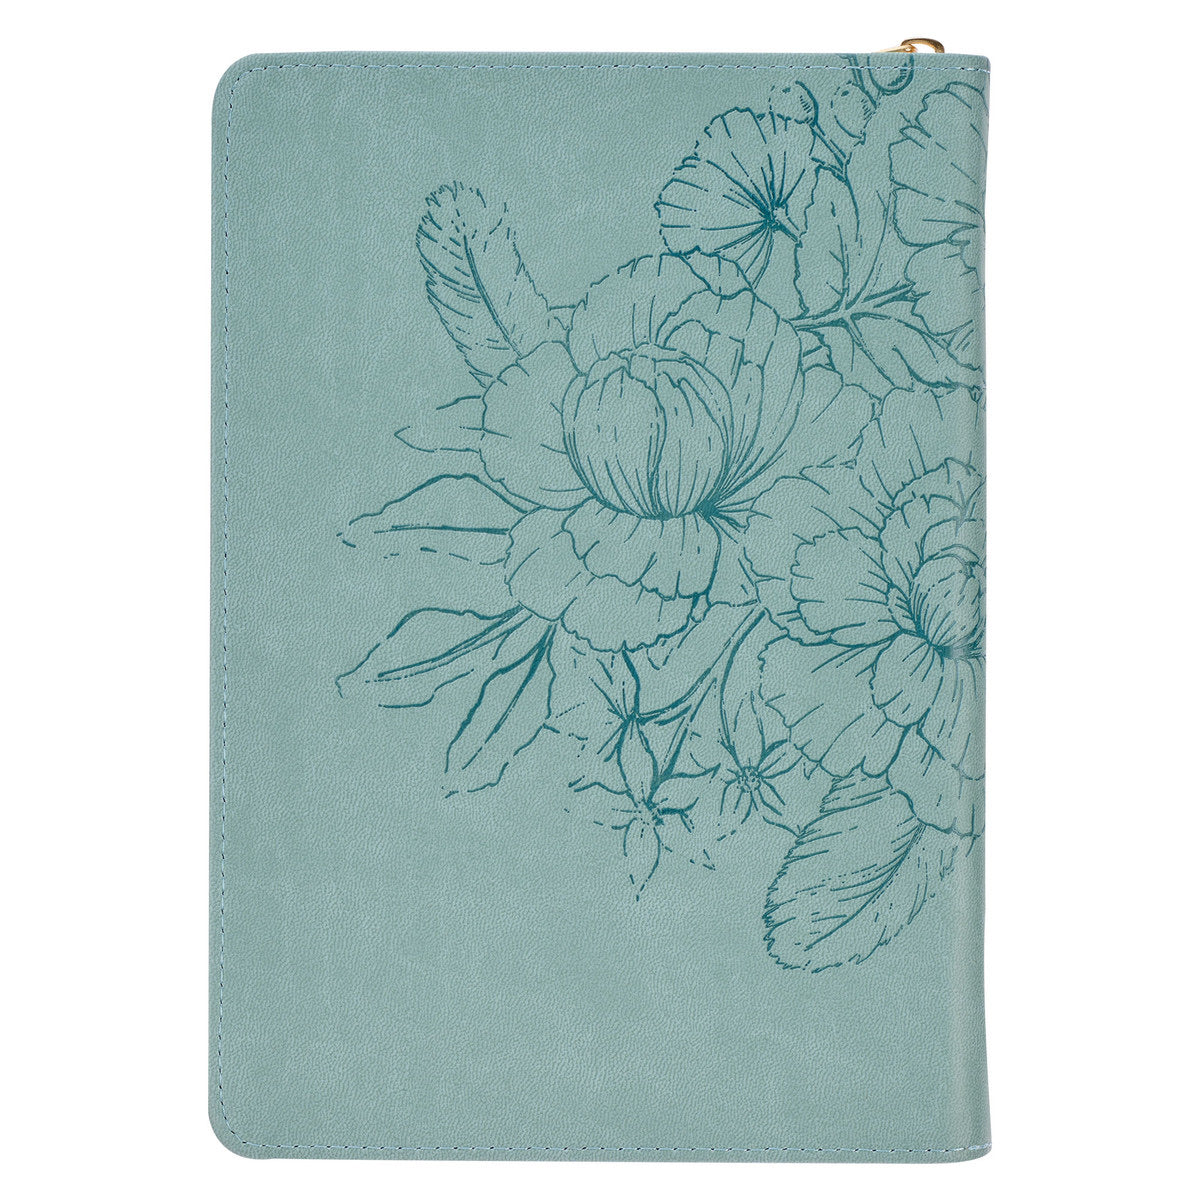 Rejoice Teal Floral Faux Leather Classic Journal with Zippered Closure - Philippians 4:4